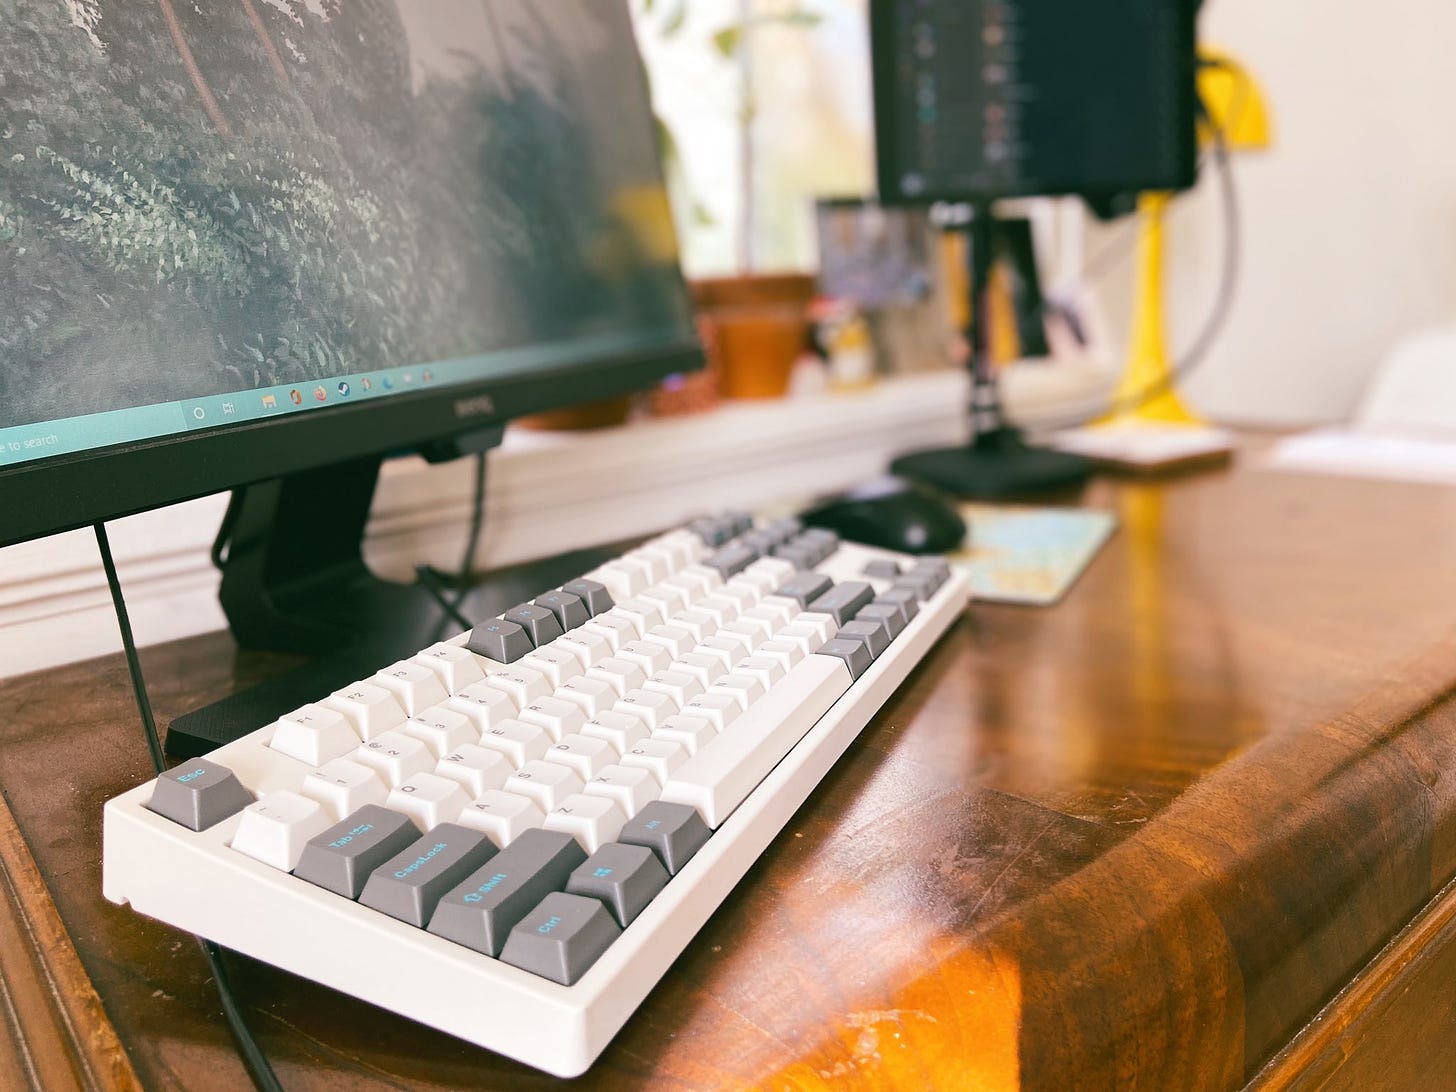 A desktop with computer monitor and mechanical keyboard, with a mouse and elevated tablet visible out of focus in the background